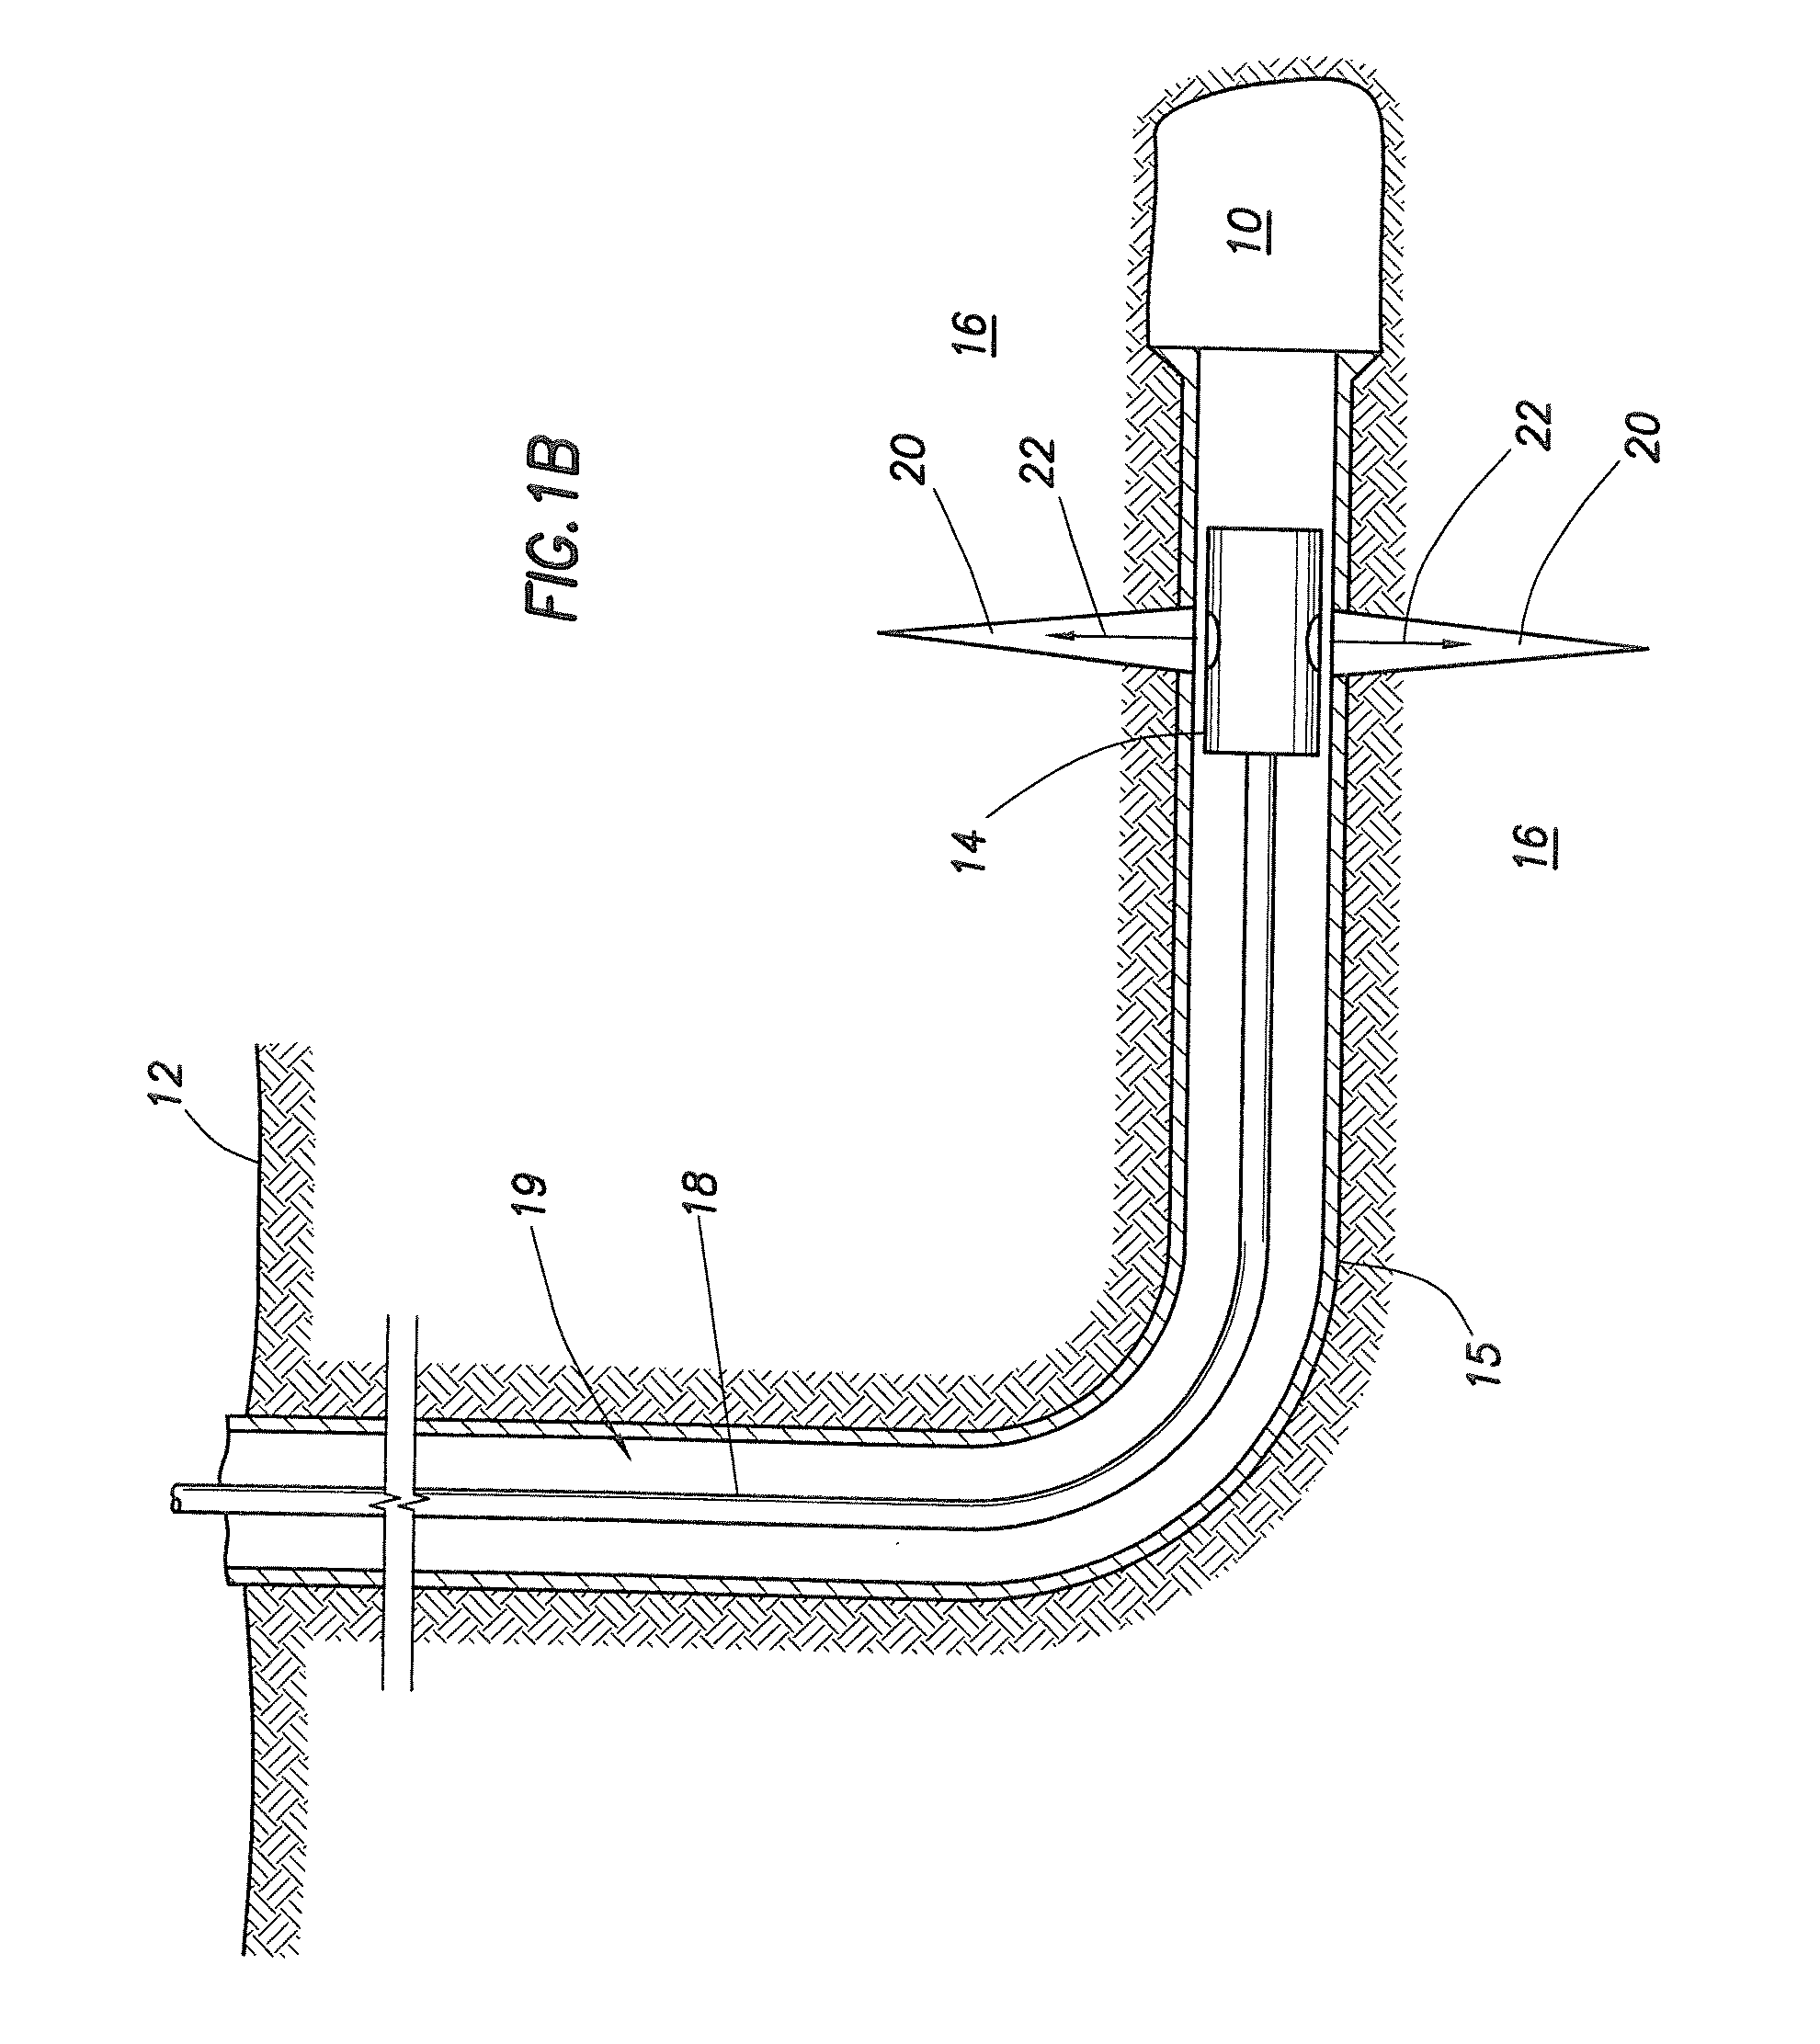 Methods of fracturing a subterranean formation using a jetting tool and a viscoelastic surfactant fluid to minimize formation damage